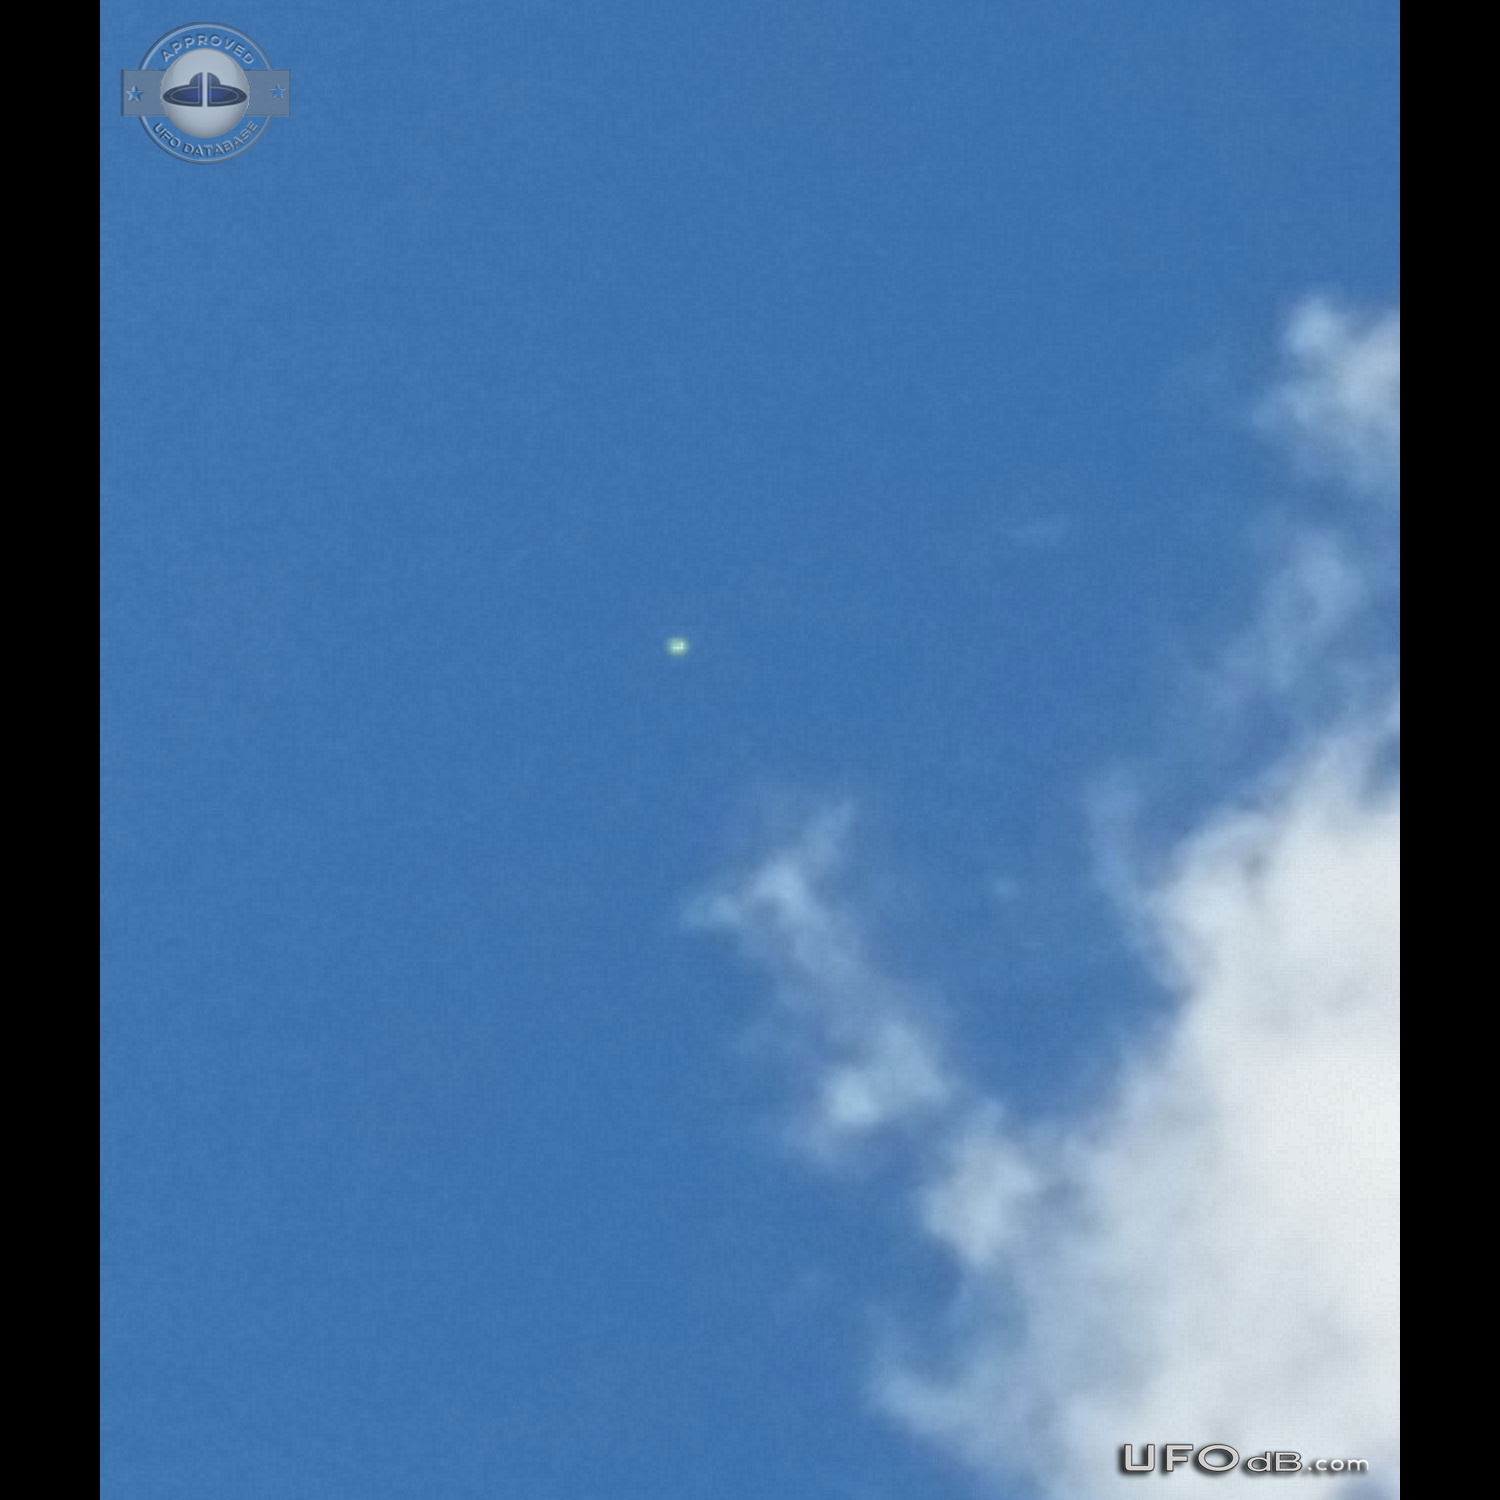 Looked up and saw an bright UFO hovering - Miami Florida USA 2014 UFO Picture #622-2